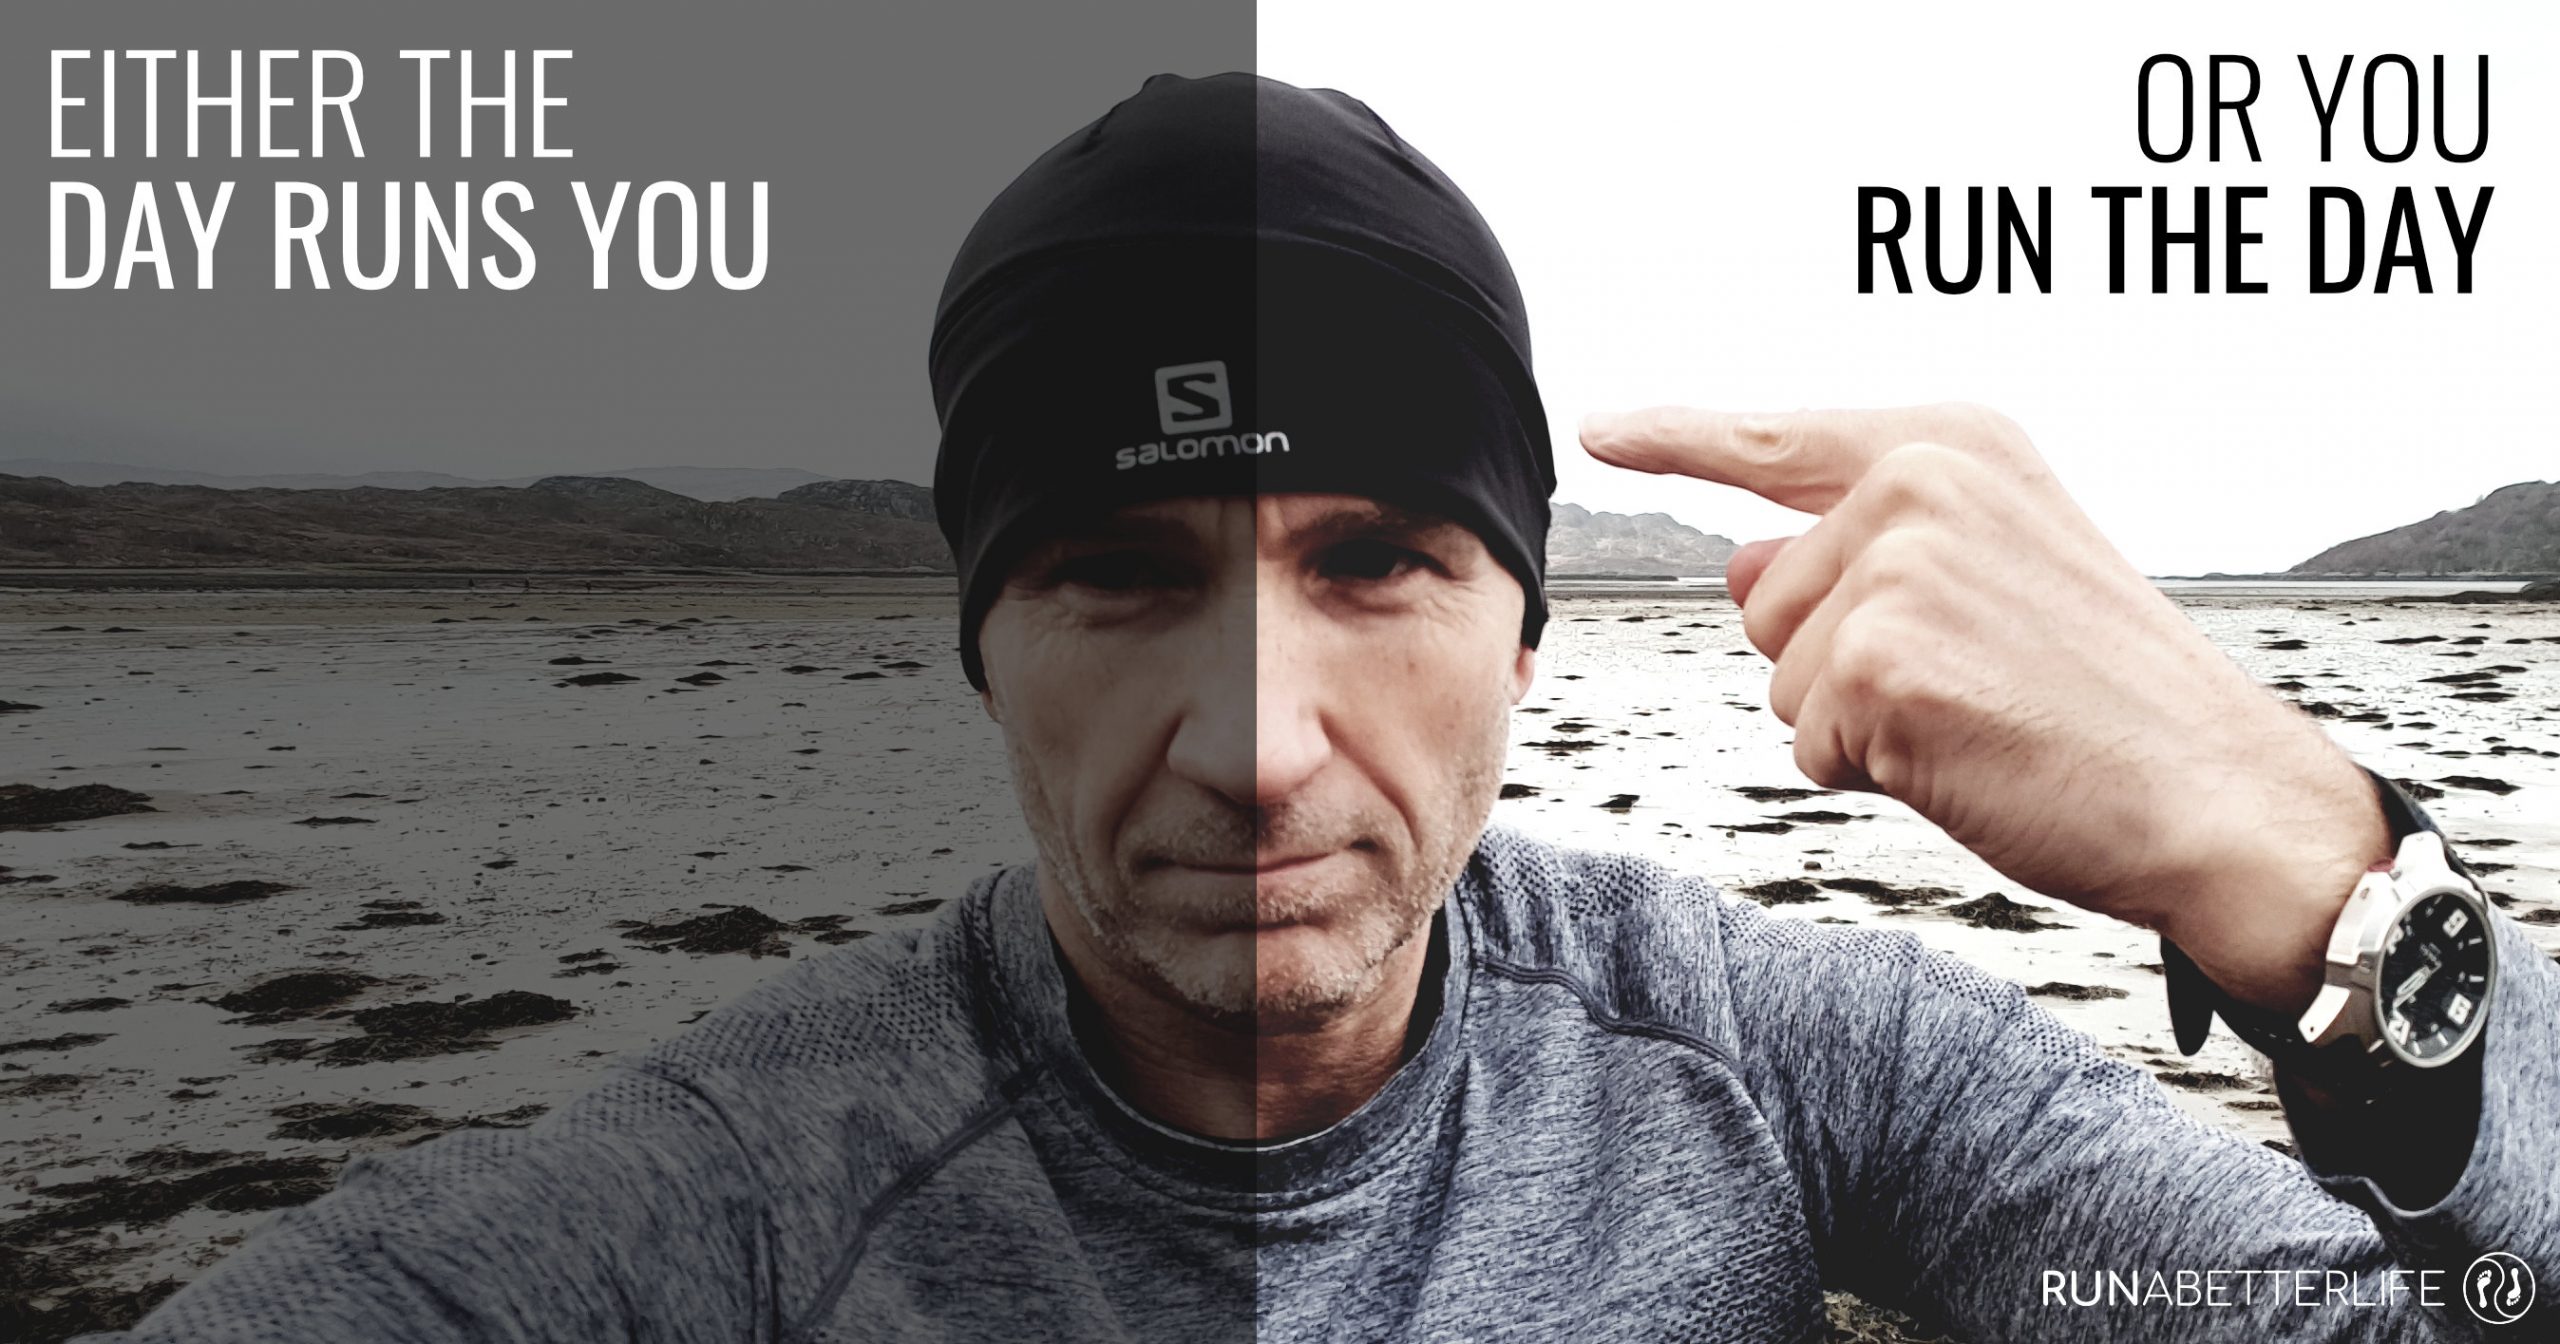 James Eastwood (runabetterlife.com) pointing to a runner's brain